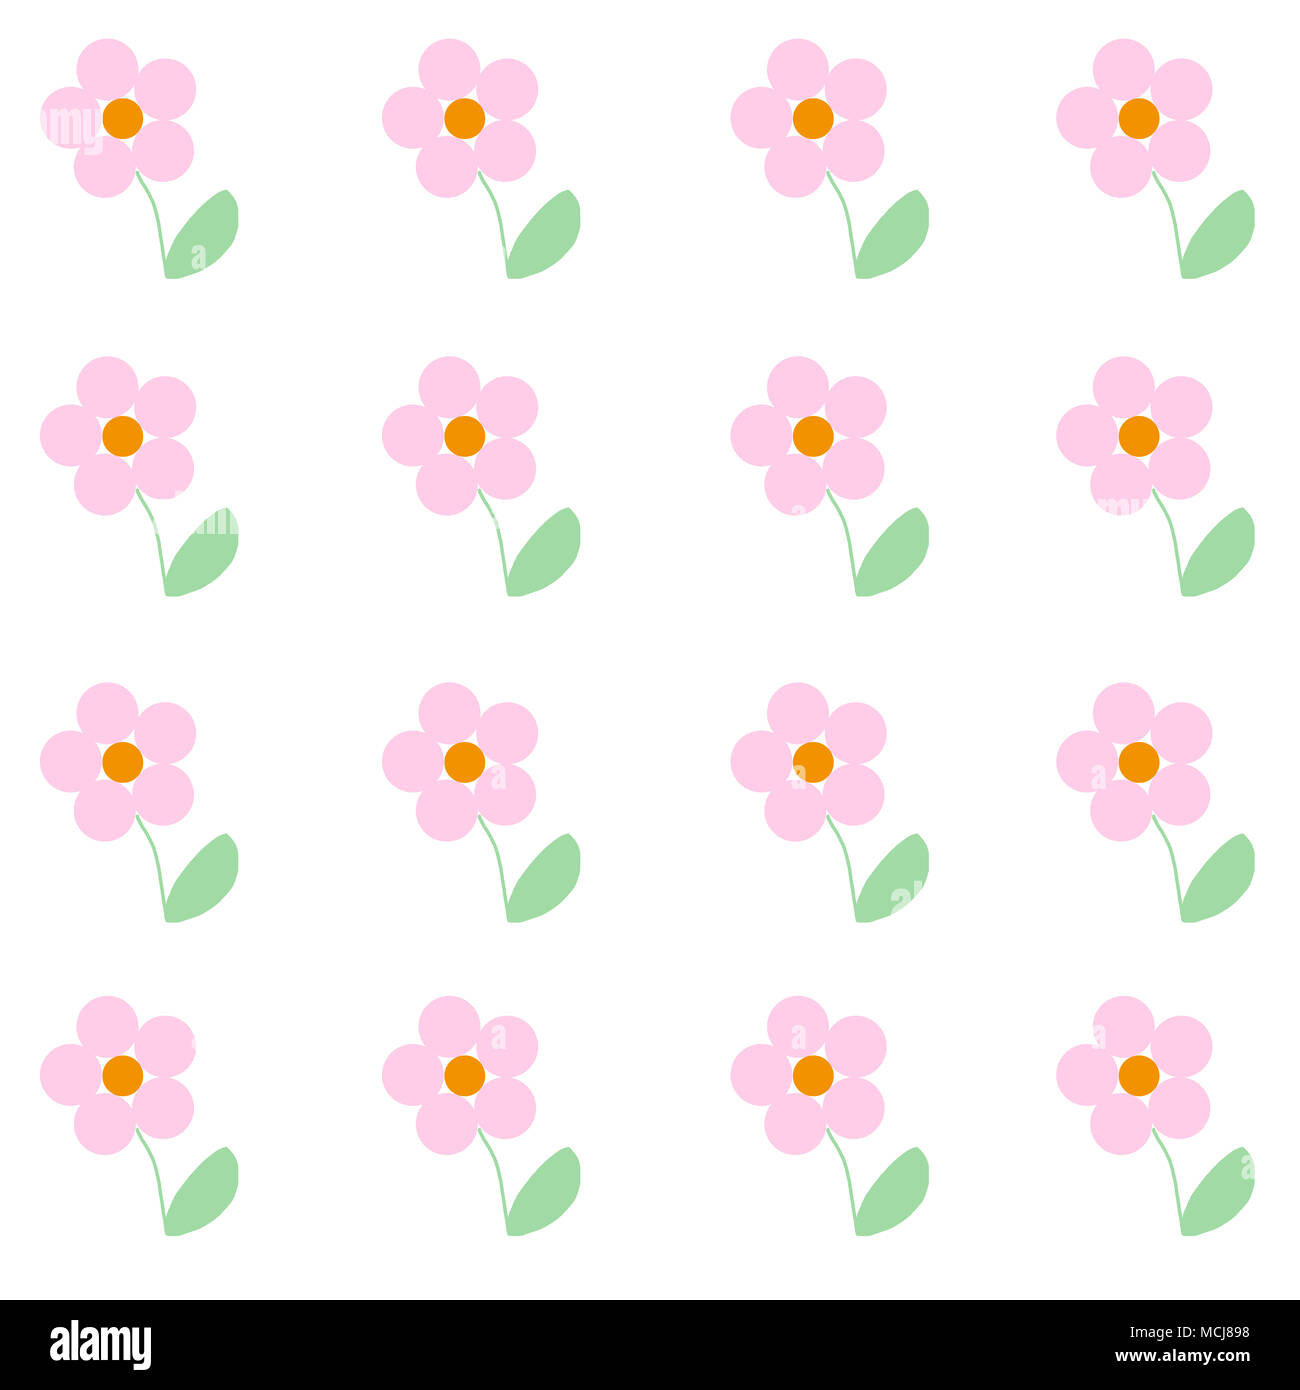 Cute illustrated baby pink flowers. Simple print to be used as a canvas, background, wallpaper... Childlike drawing with pastel colors. Stock Photo